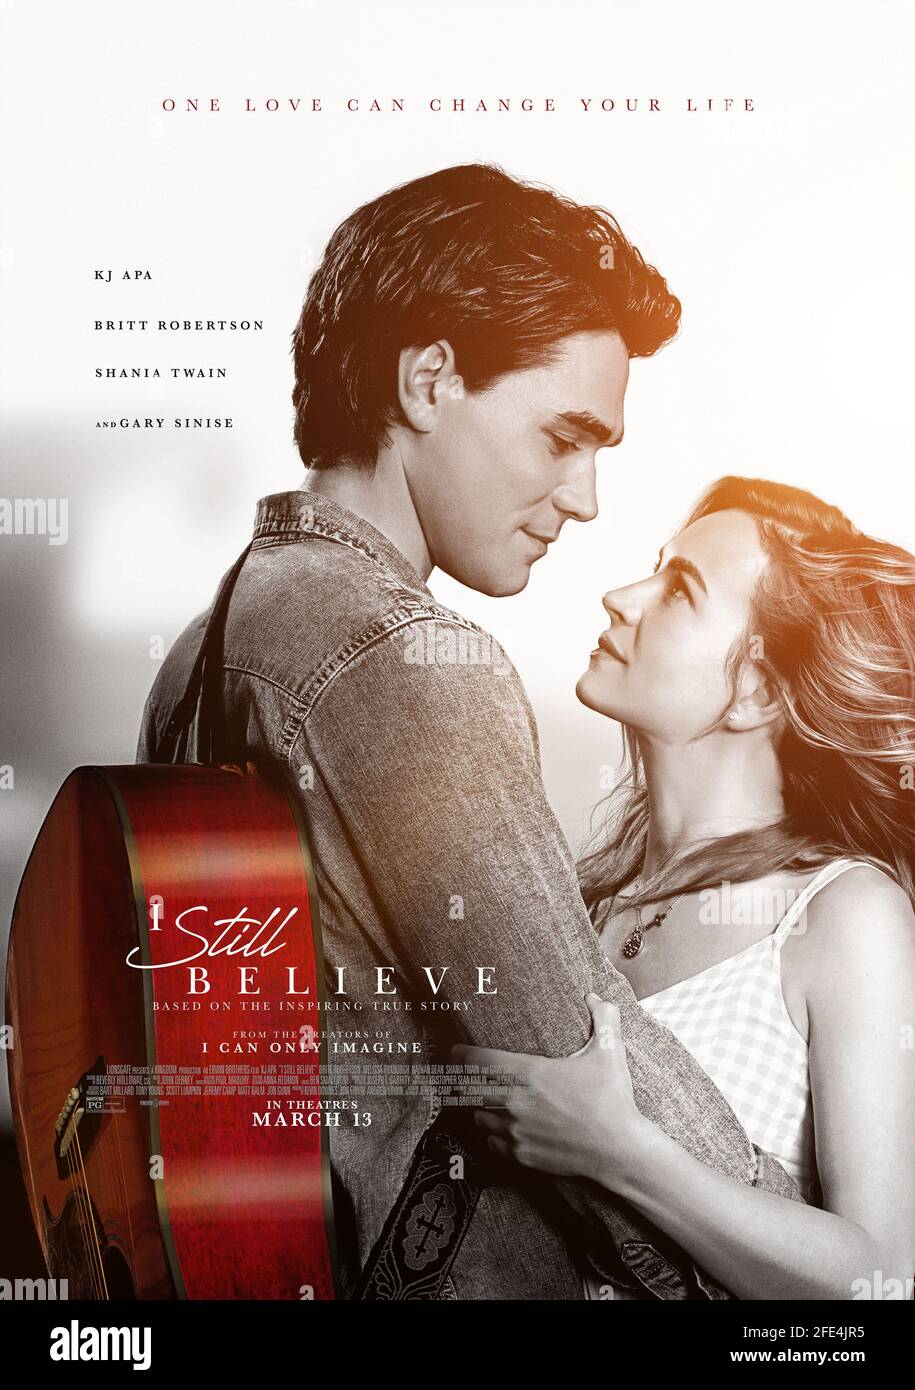 BRITT ROBERTSON and KJ APA in I STILL BELIEVE (2020), directed by ANDREW ERWIN and JON ERWIN. Copyright: Editorial use only. No merchandising or book covers. This is a publicly distributed handout. Access rights only, no license of copyright provided. Only to be reproduced in conjunction with promotion of this film. Credit: Kevin Downes Productions / Kingdom Story Company / Album Stock Photo